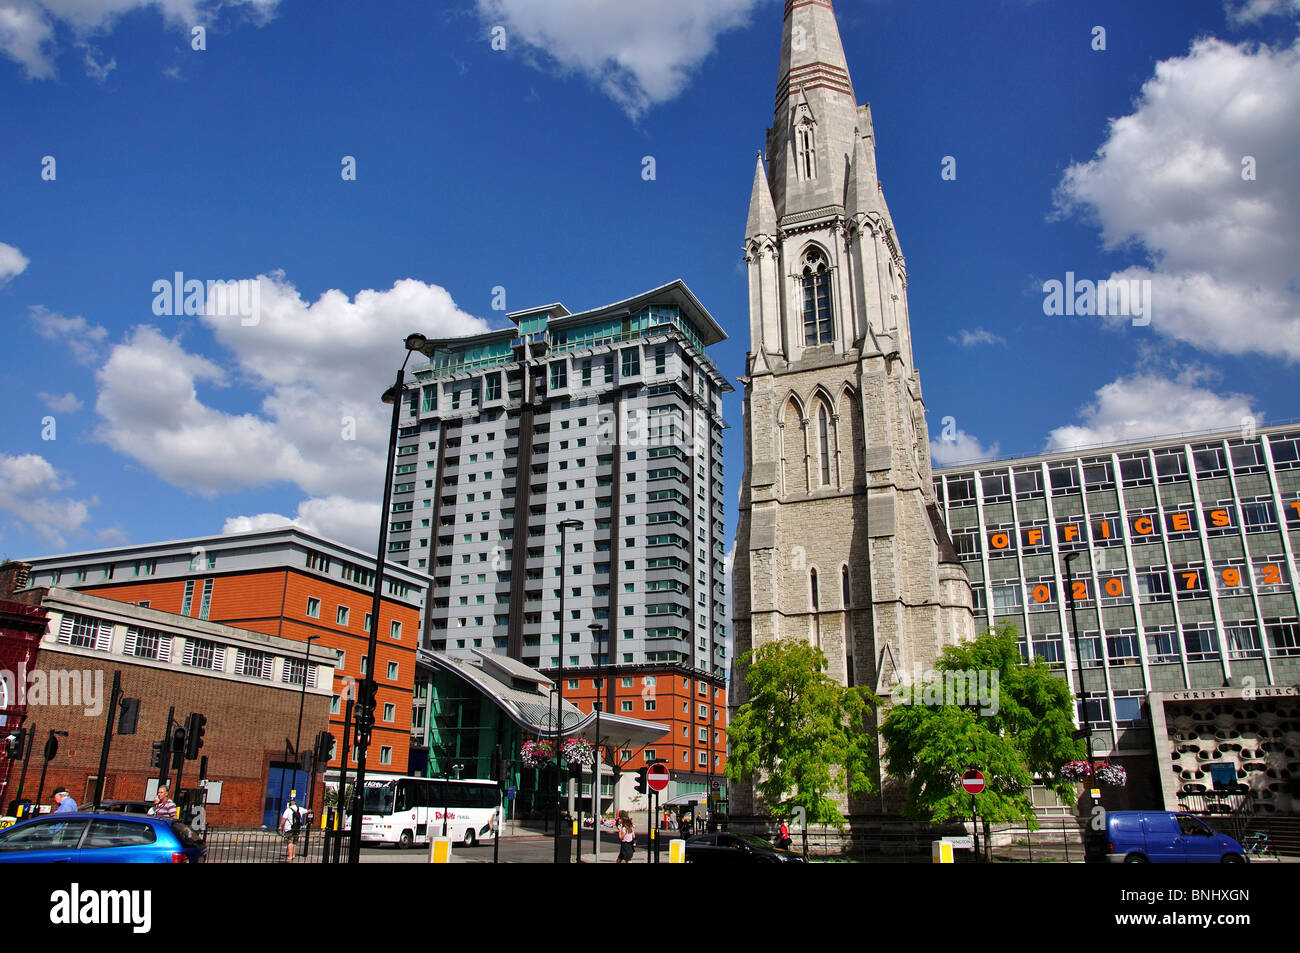 The Perspective Building and Christ Church, Lambeth, The London Borough of Lambeth, Greater London, England, United Kingdom Stock Photo